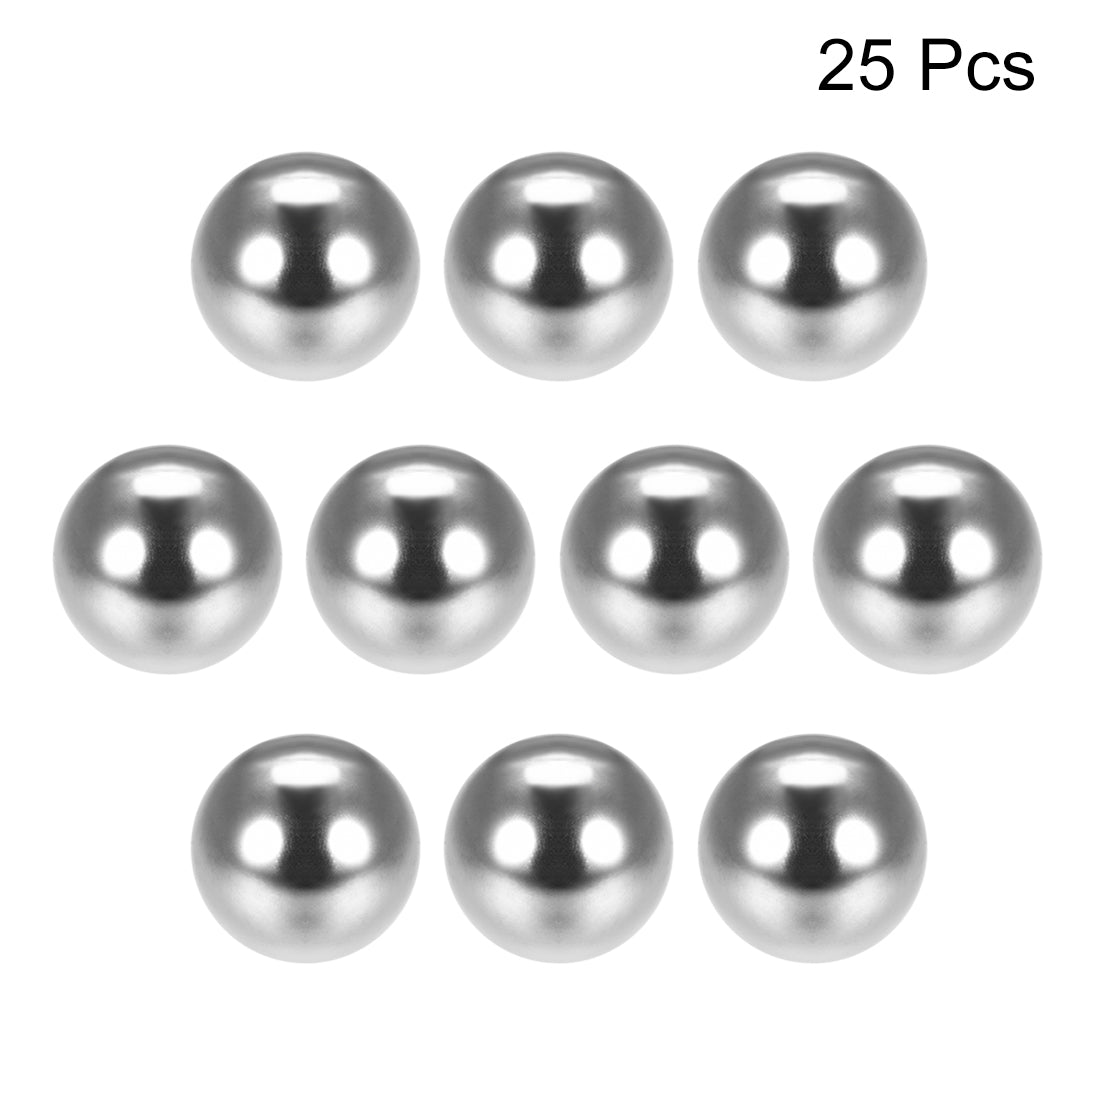 uxcell Uxcell 3/8 Inch Precision Chrome Steel Bearing Balls G25 25pcs